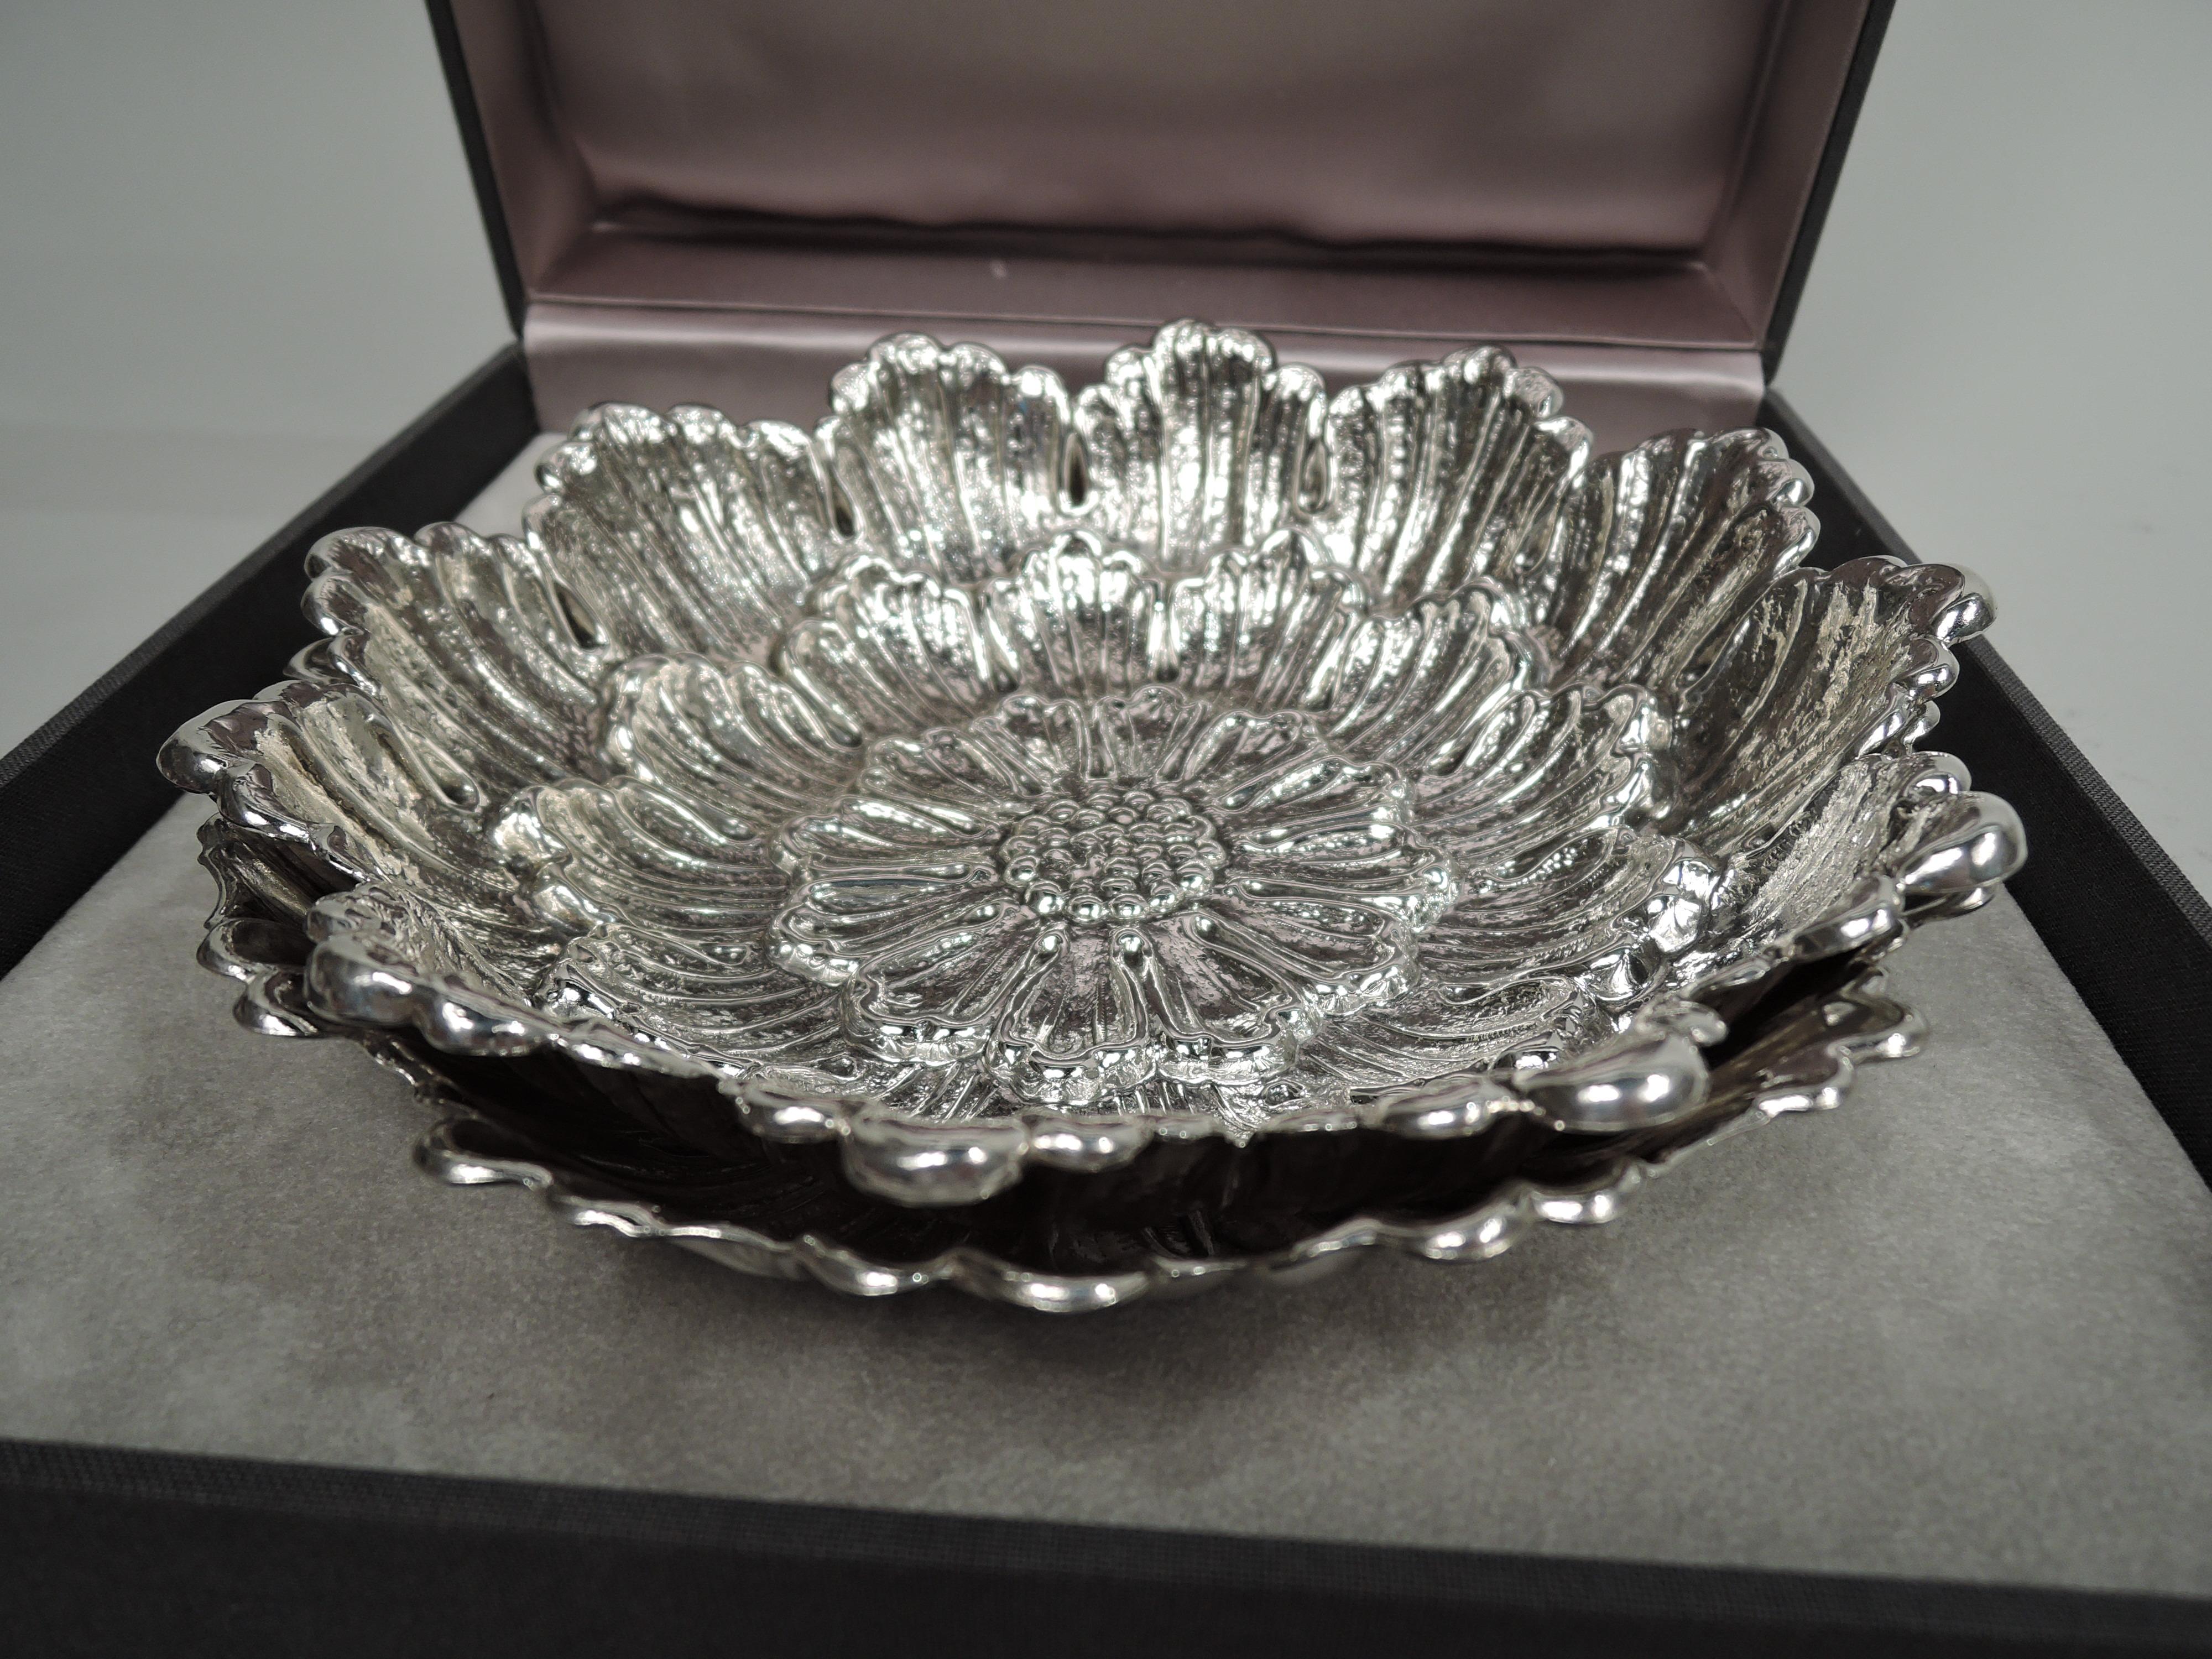 Two sterling silver flower head bowls. One is collage-style with 3 graduated layers of fluted, striated, and irregular petals and beaded center. The other has fluted and irregular petals with collage-style center comprising 2 graduated and scalloped